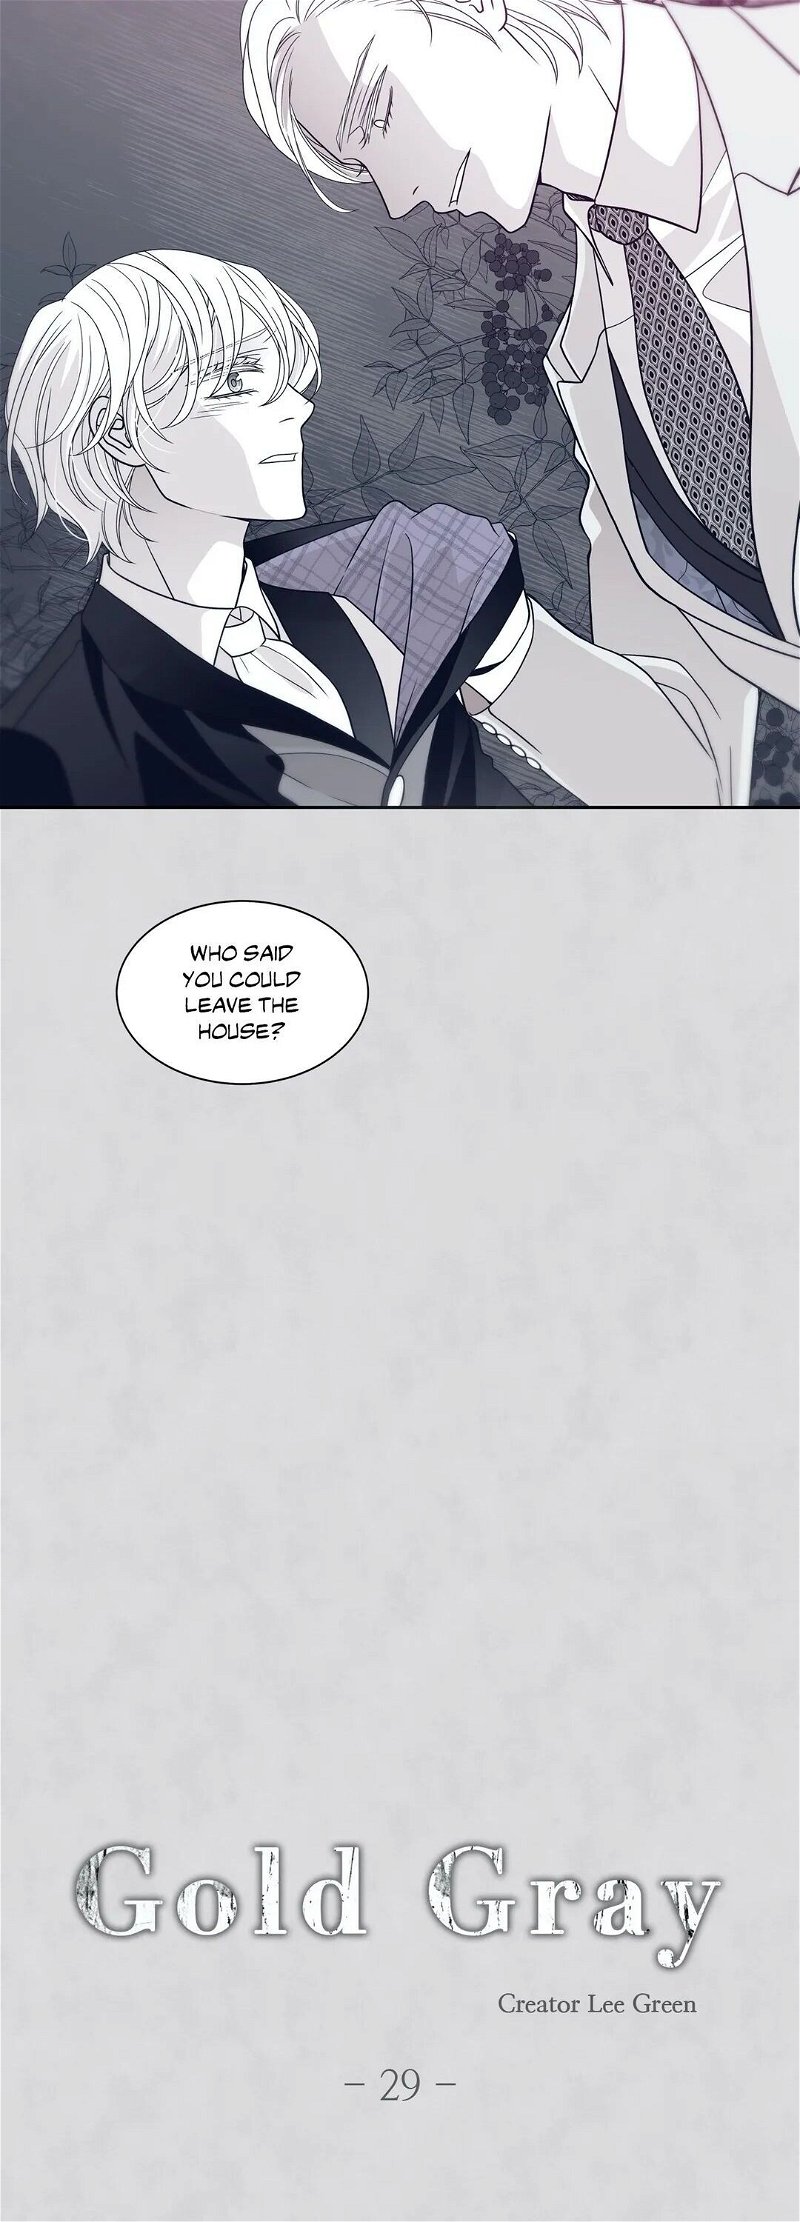 Gold Gray Chapter 29 - Page 2